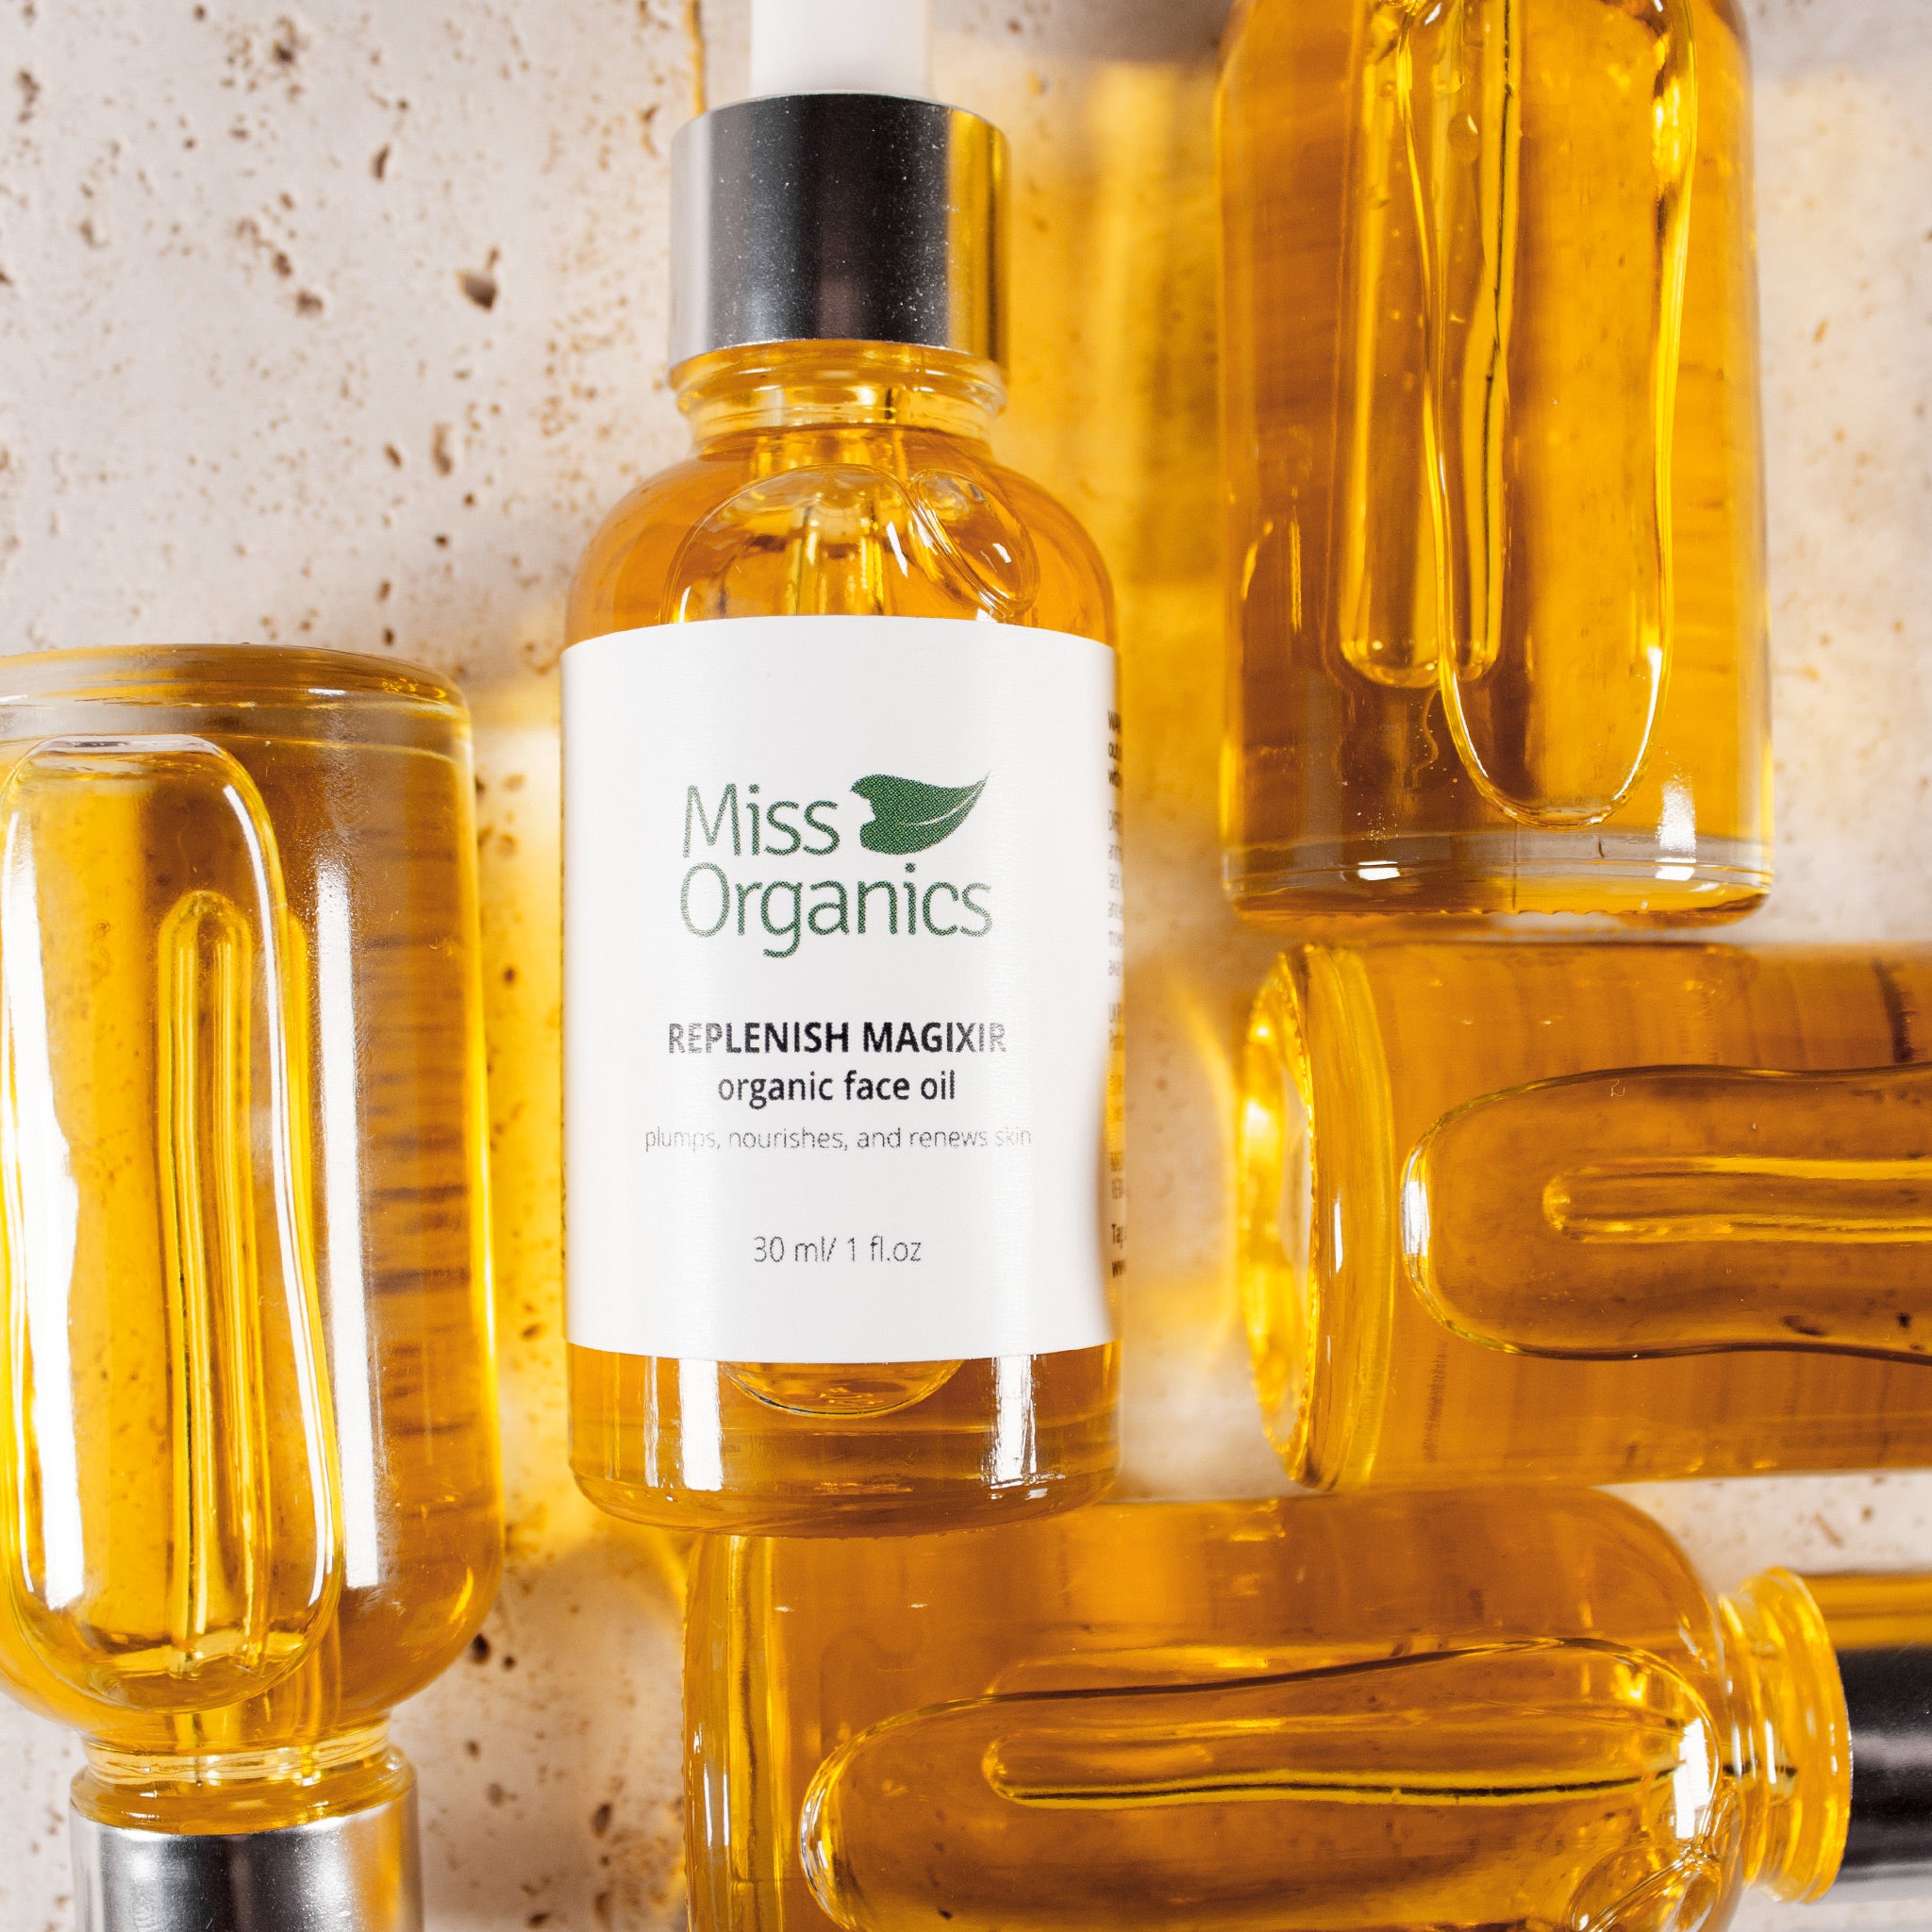 Replenish Magixir Organic Face Oil in glass bottle on stone background by Miss Organics